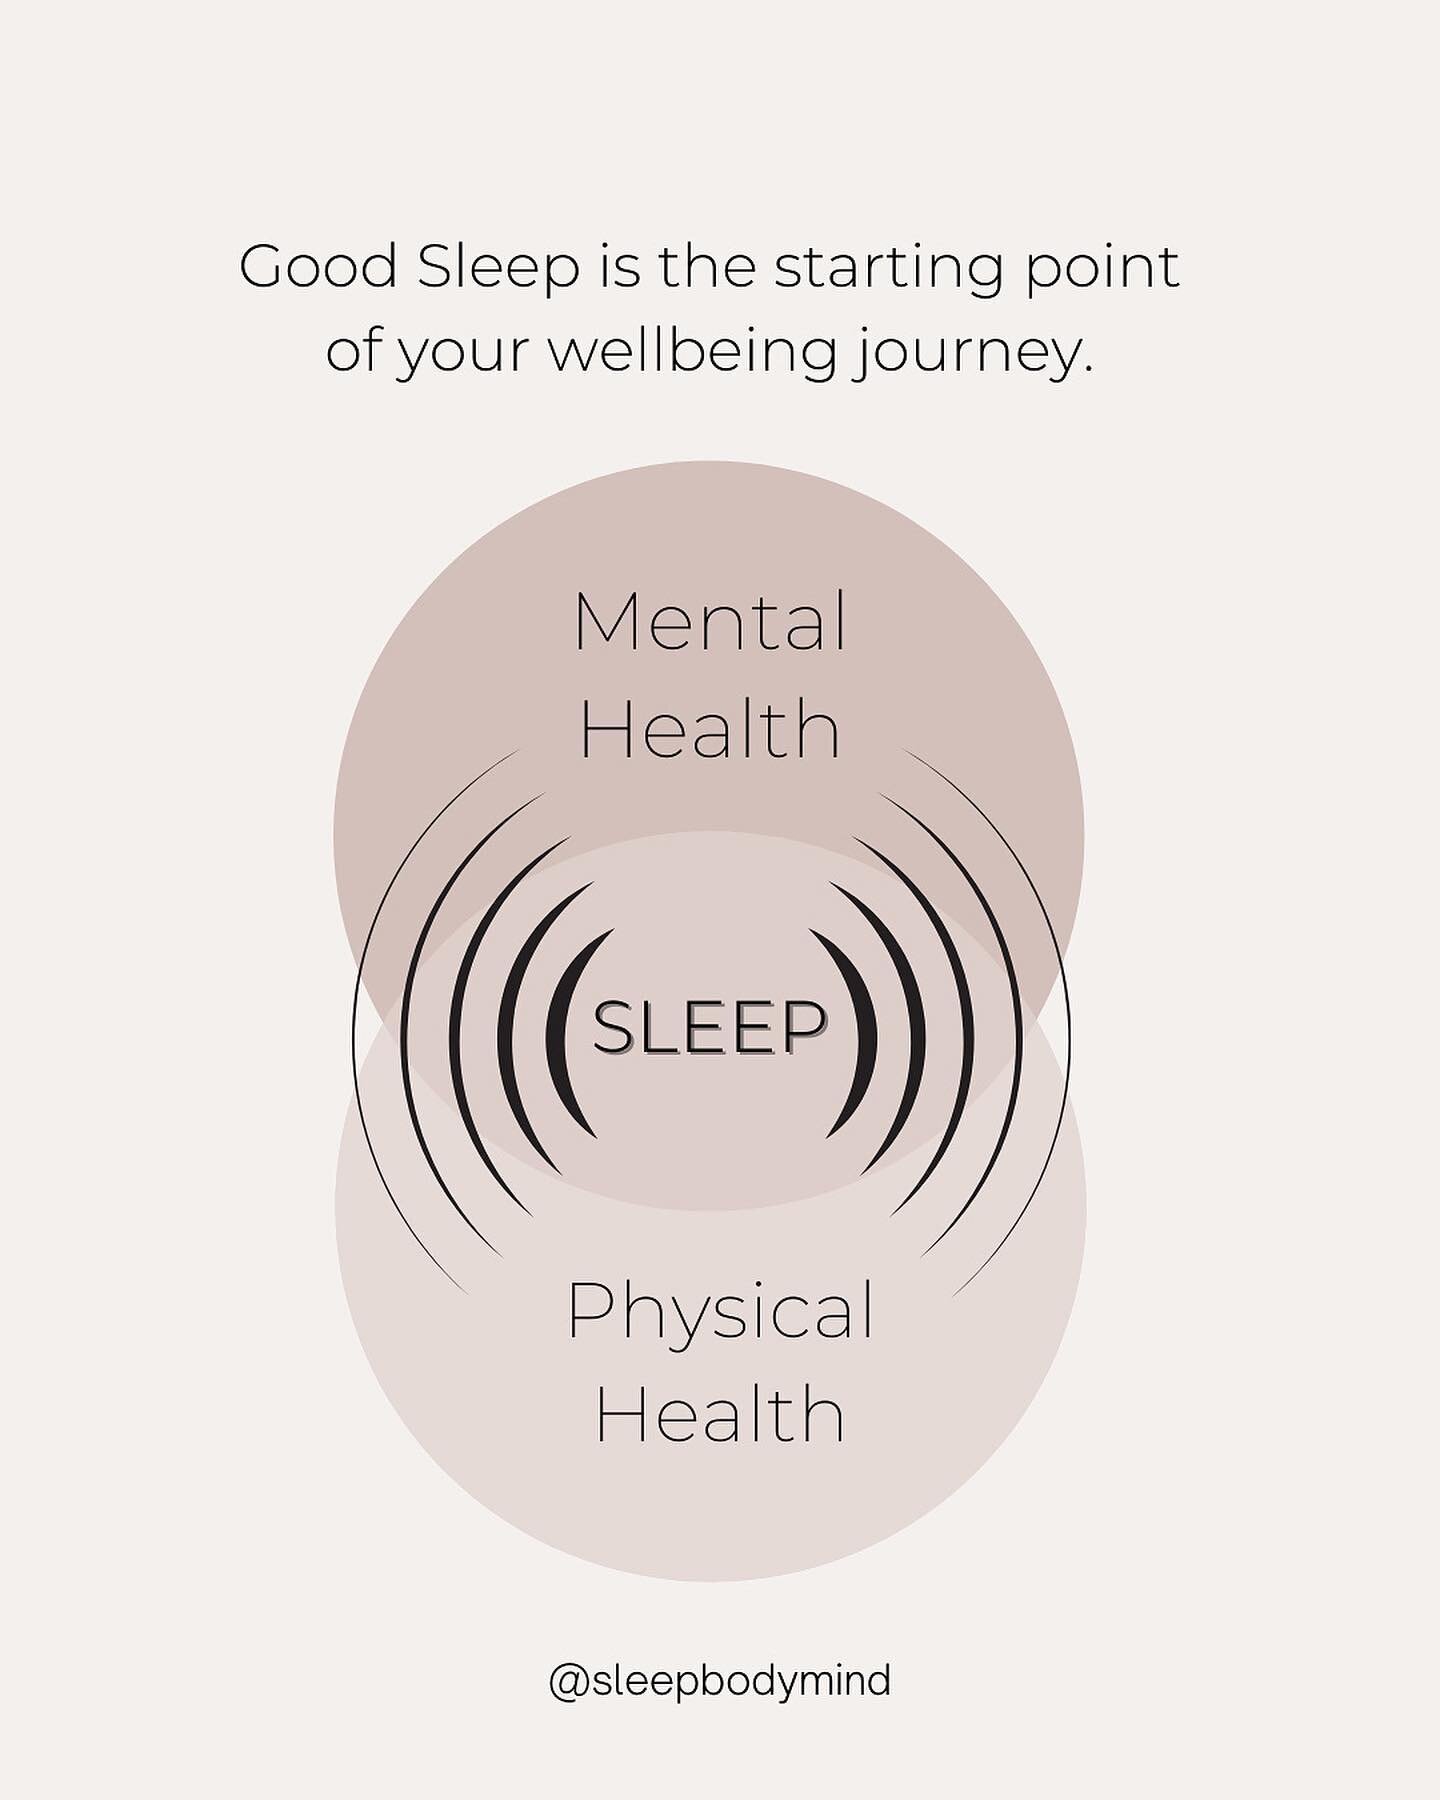 There is no short cut to better physical and mental wellbeing. It starts with good sleep and the ability to know when to rest. Sleep is not the magic pill that will solve any health issue but it&rsquo;s the part of our health that has been under-look